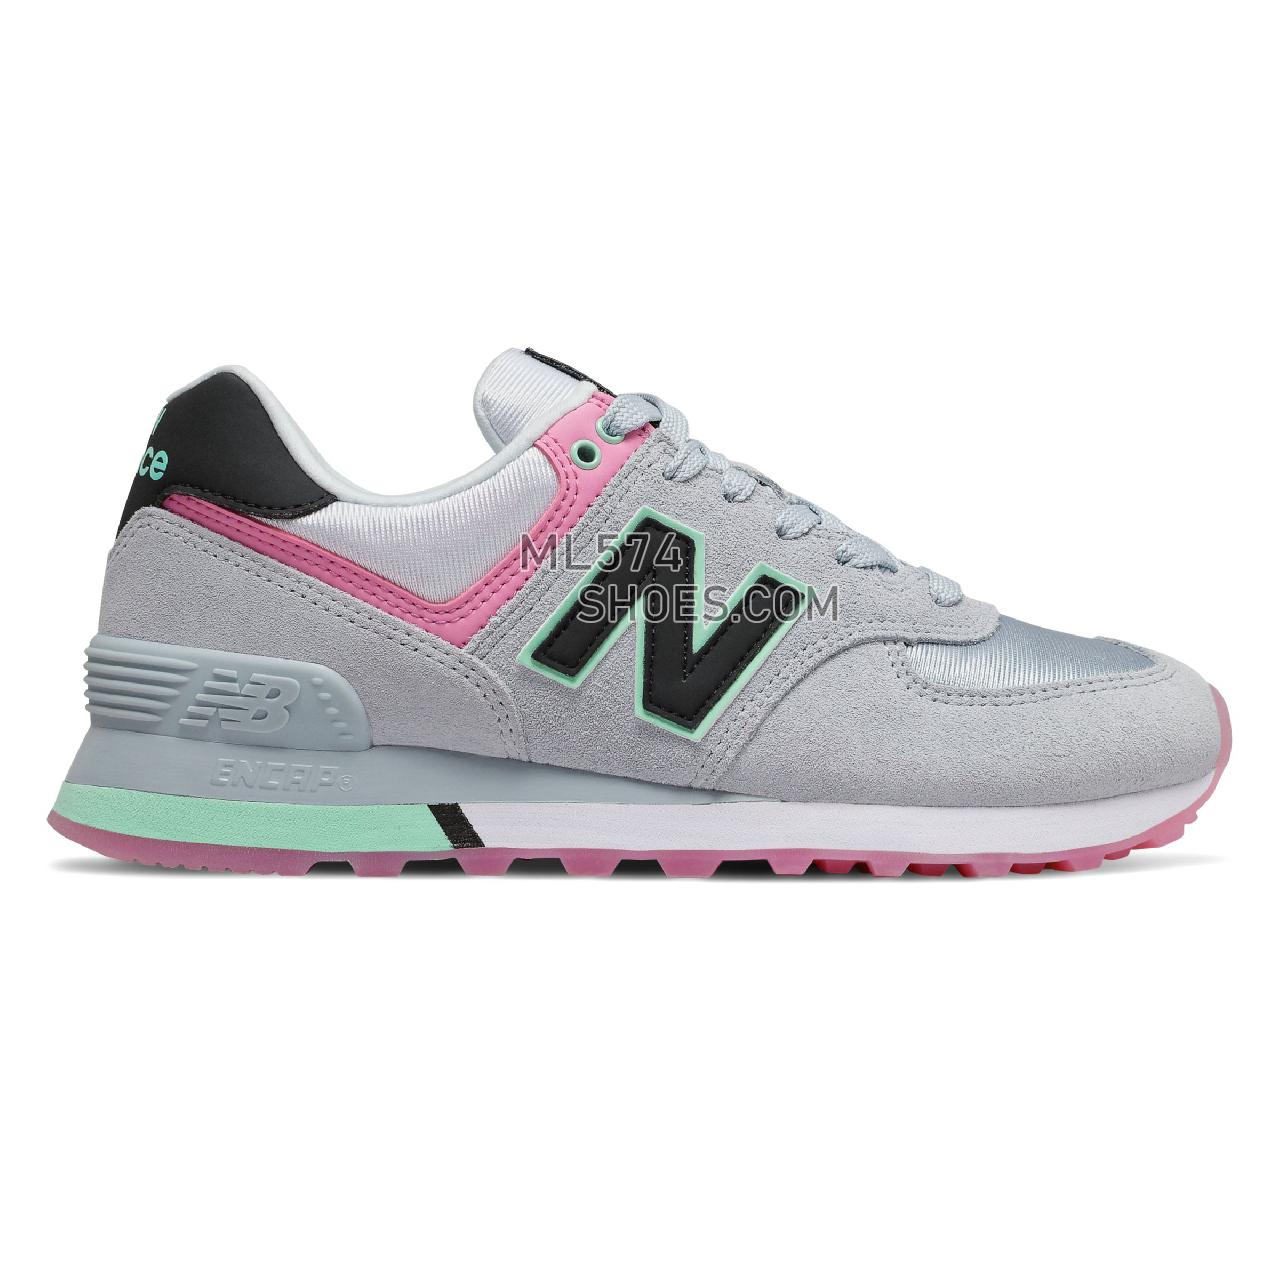 New Balance 574 - Women's Classic Sneakers - Light Cyclone with Candy Pink - WL574SAT